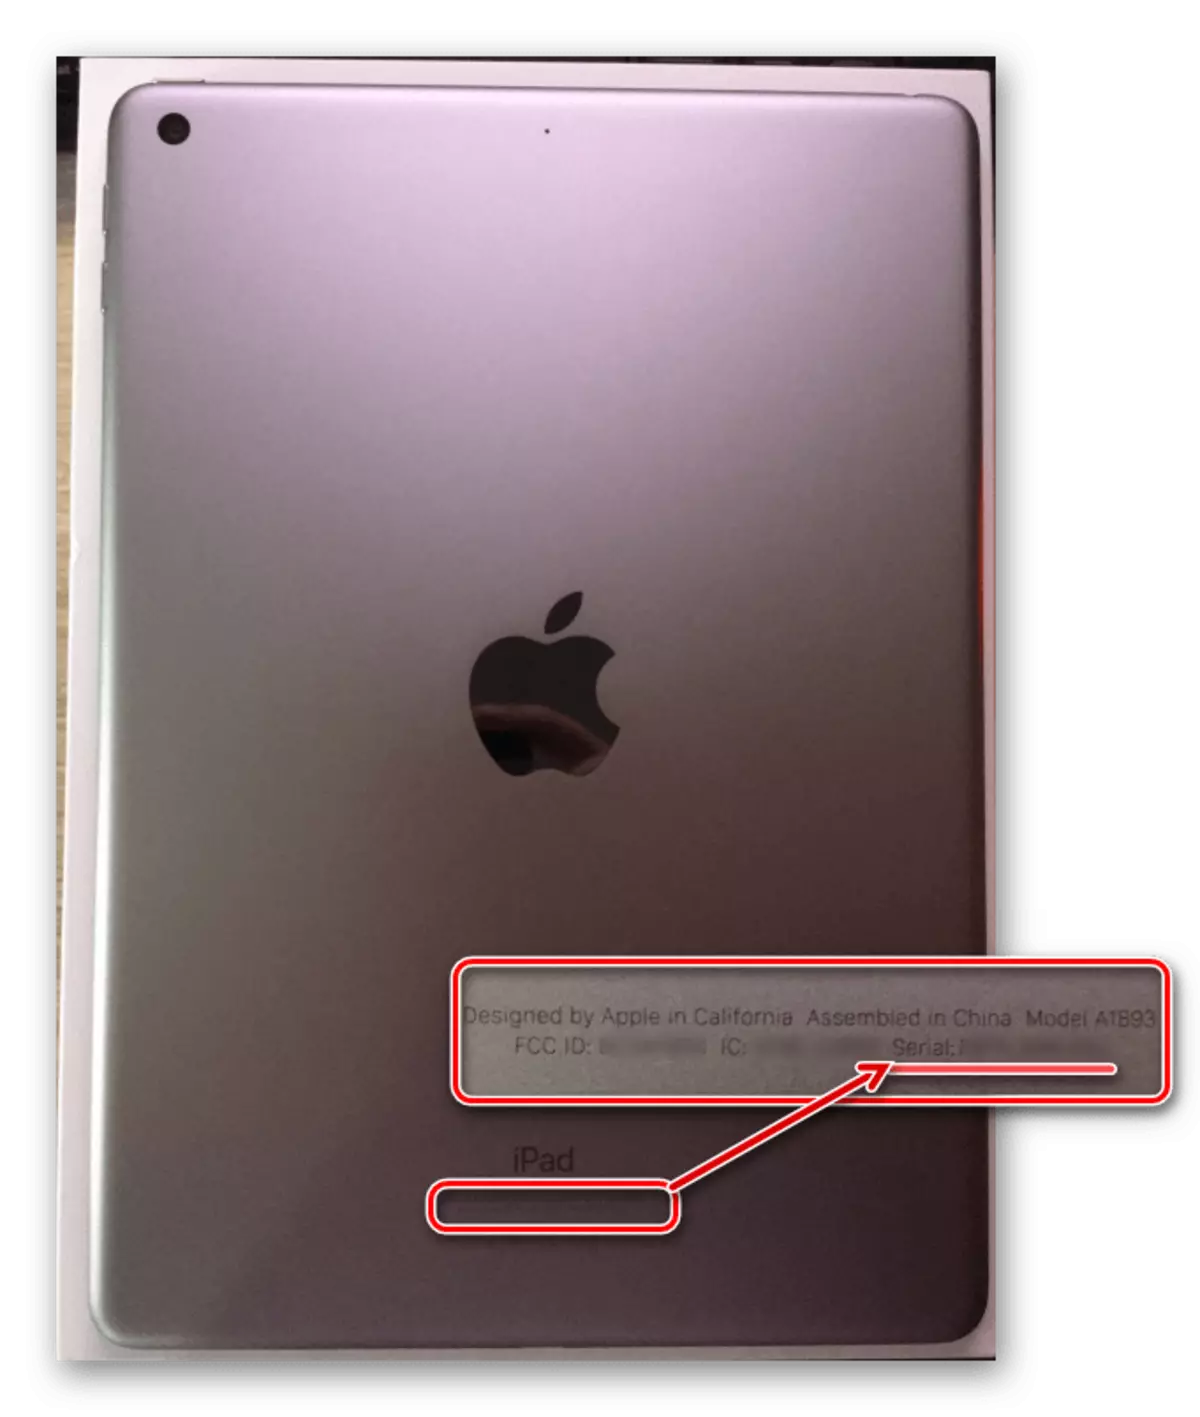 View iPad serial number on the back of the case